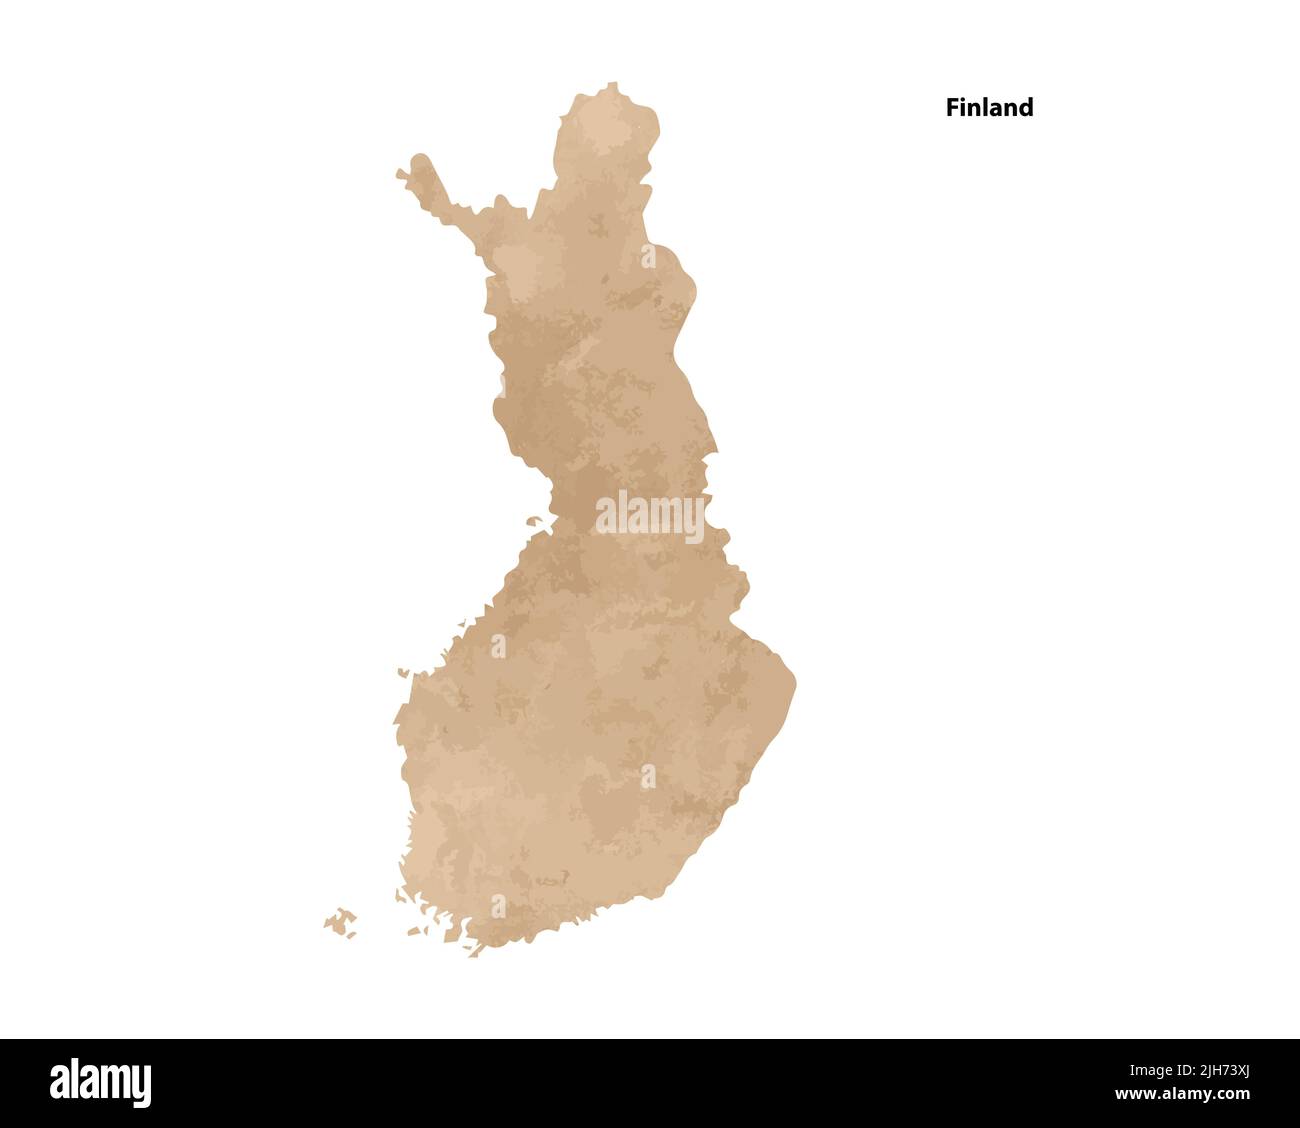 Old vintage paper textured map of Finland Country - Vector illustration Stock Vector